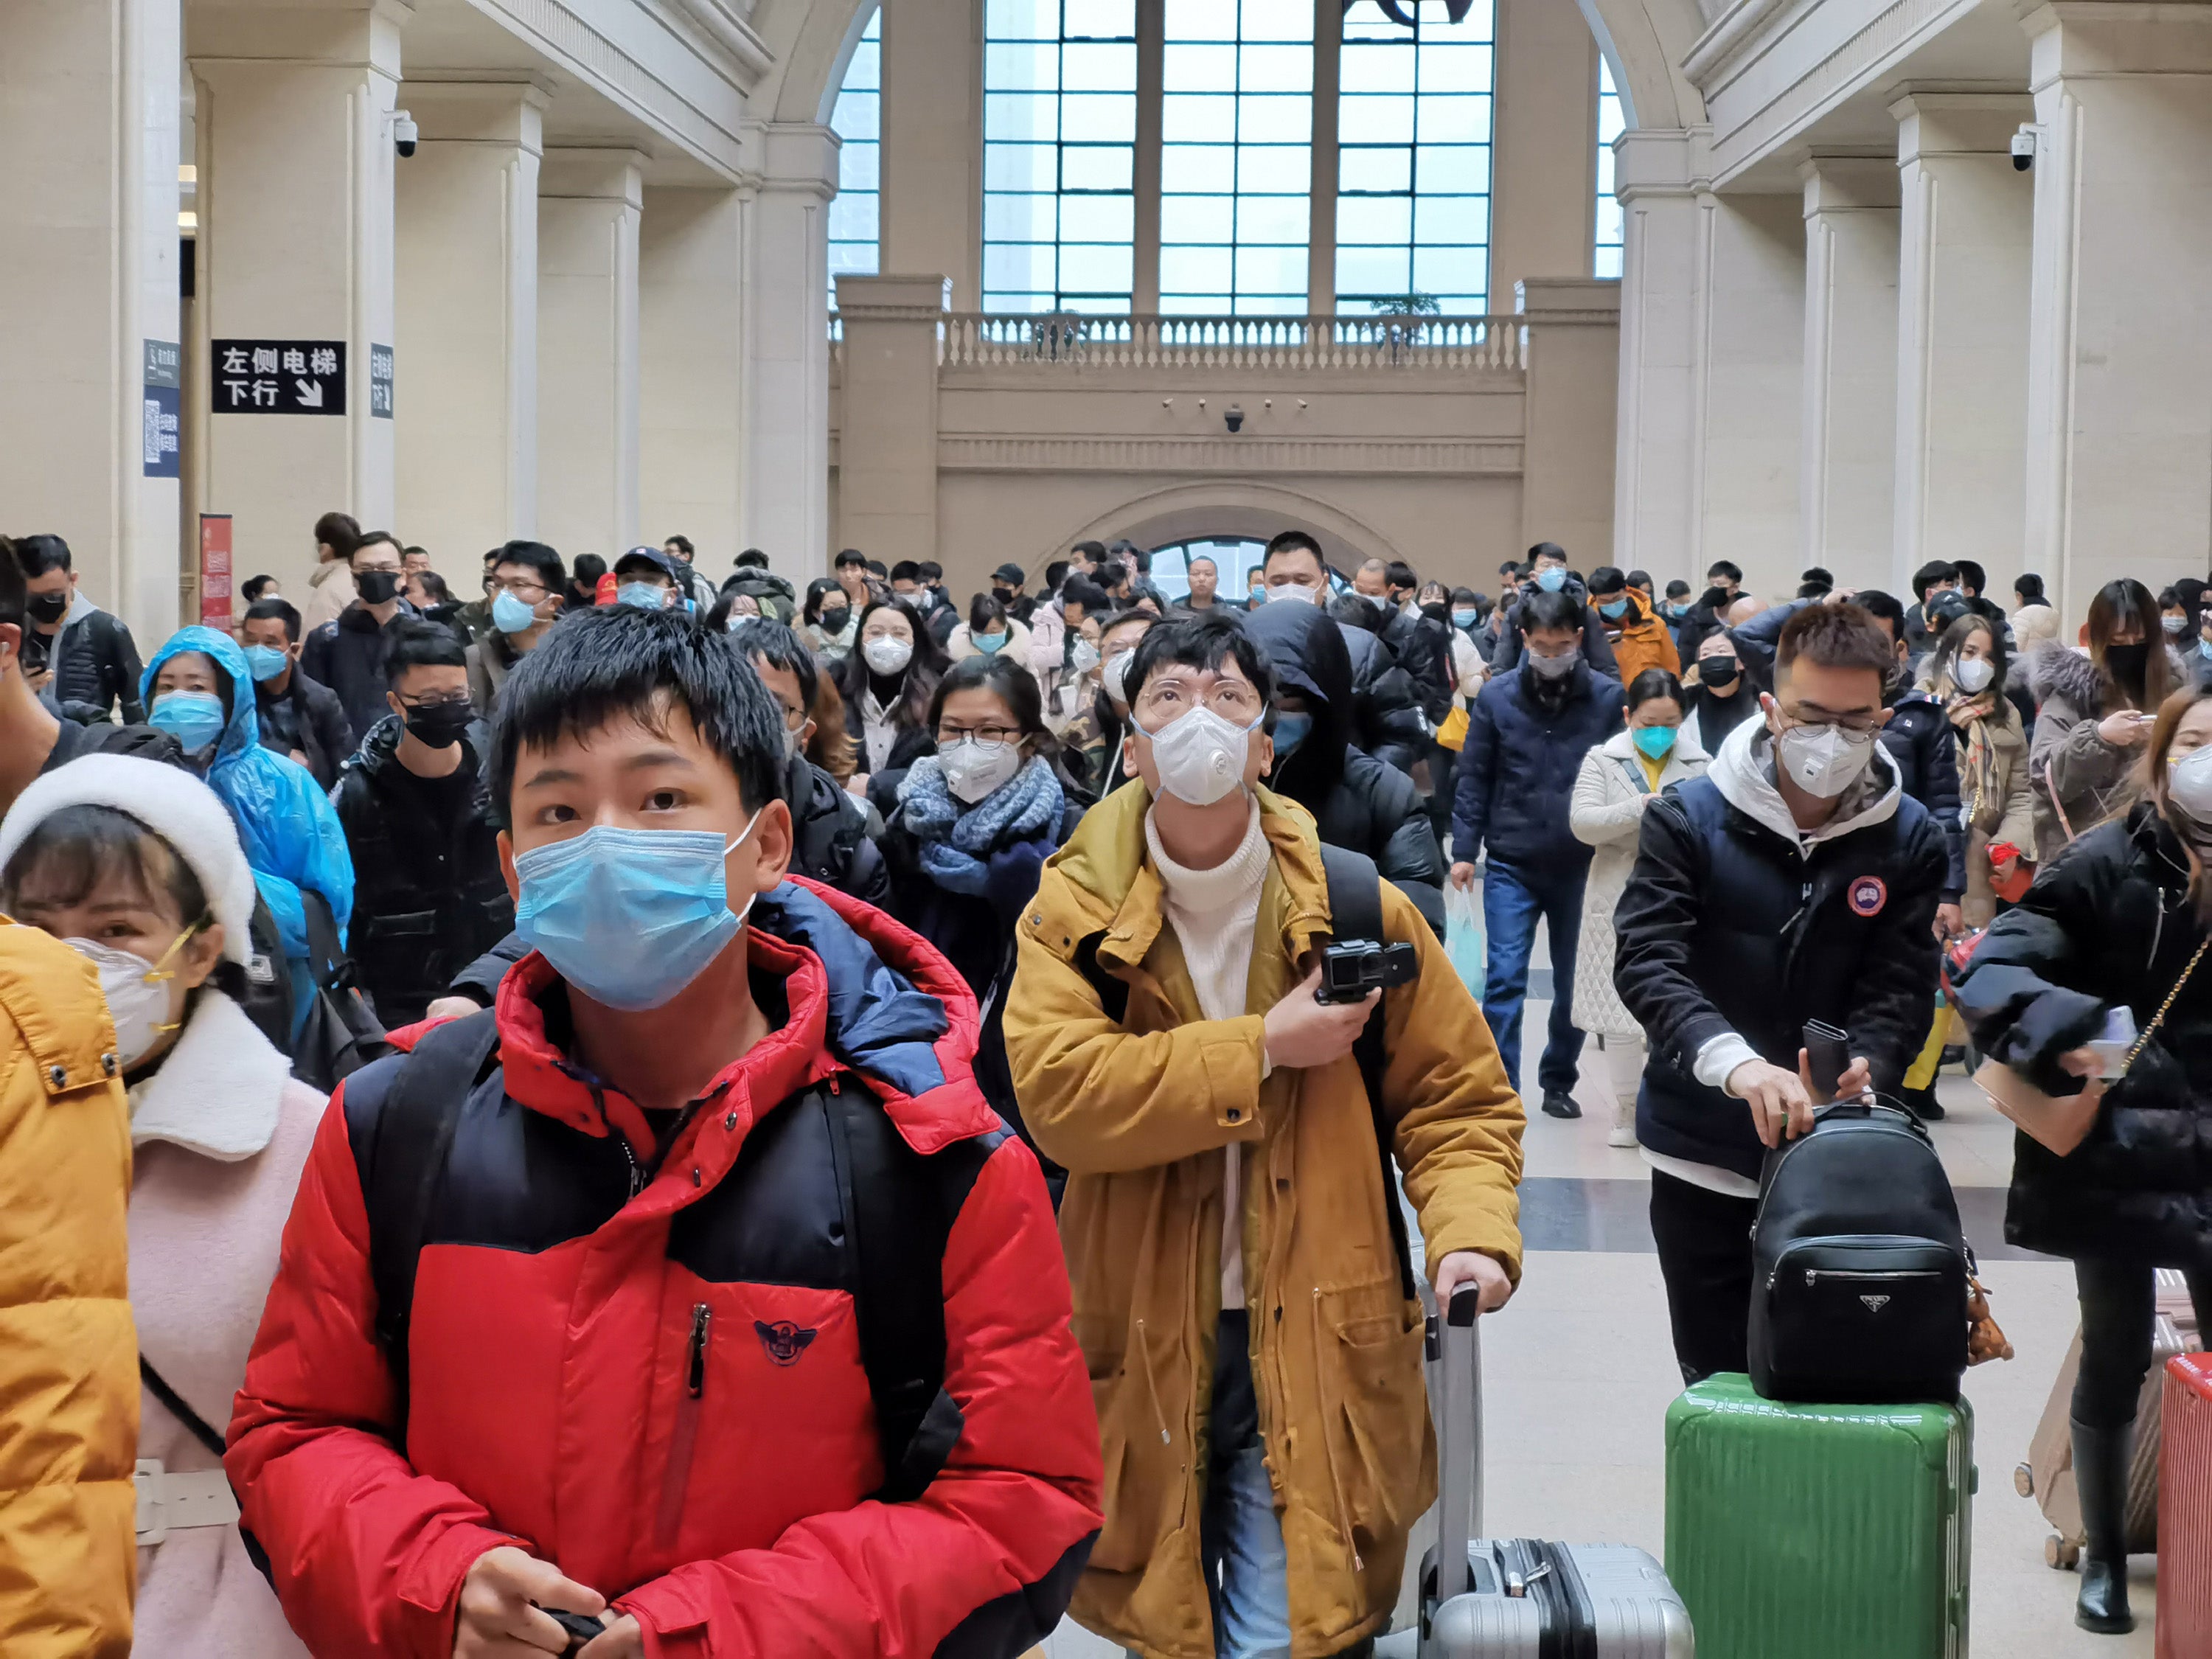 A railway station in Wuhan, pictured days after the virus was confirmed